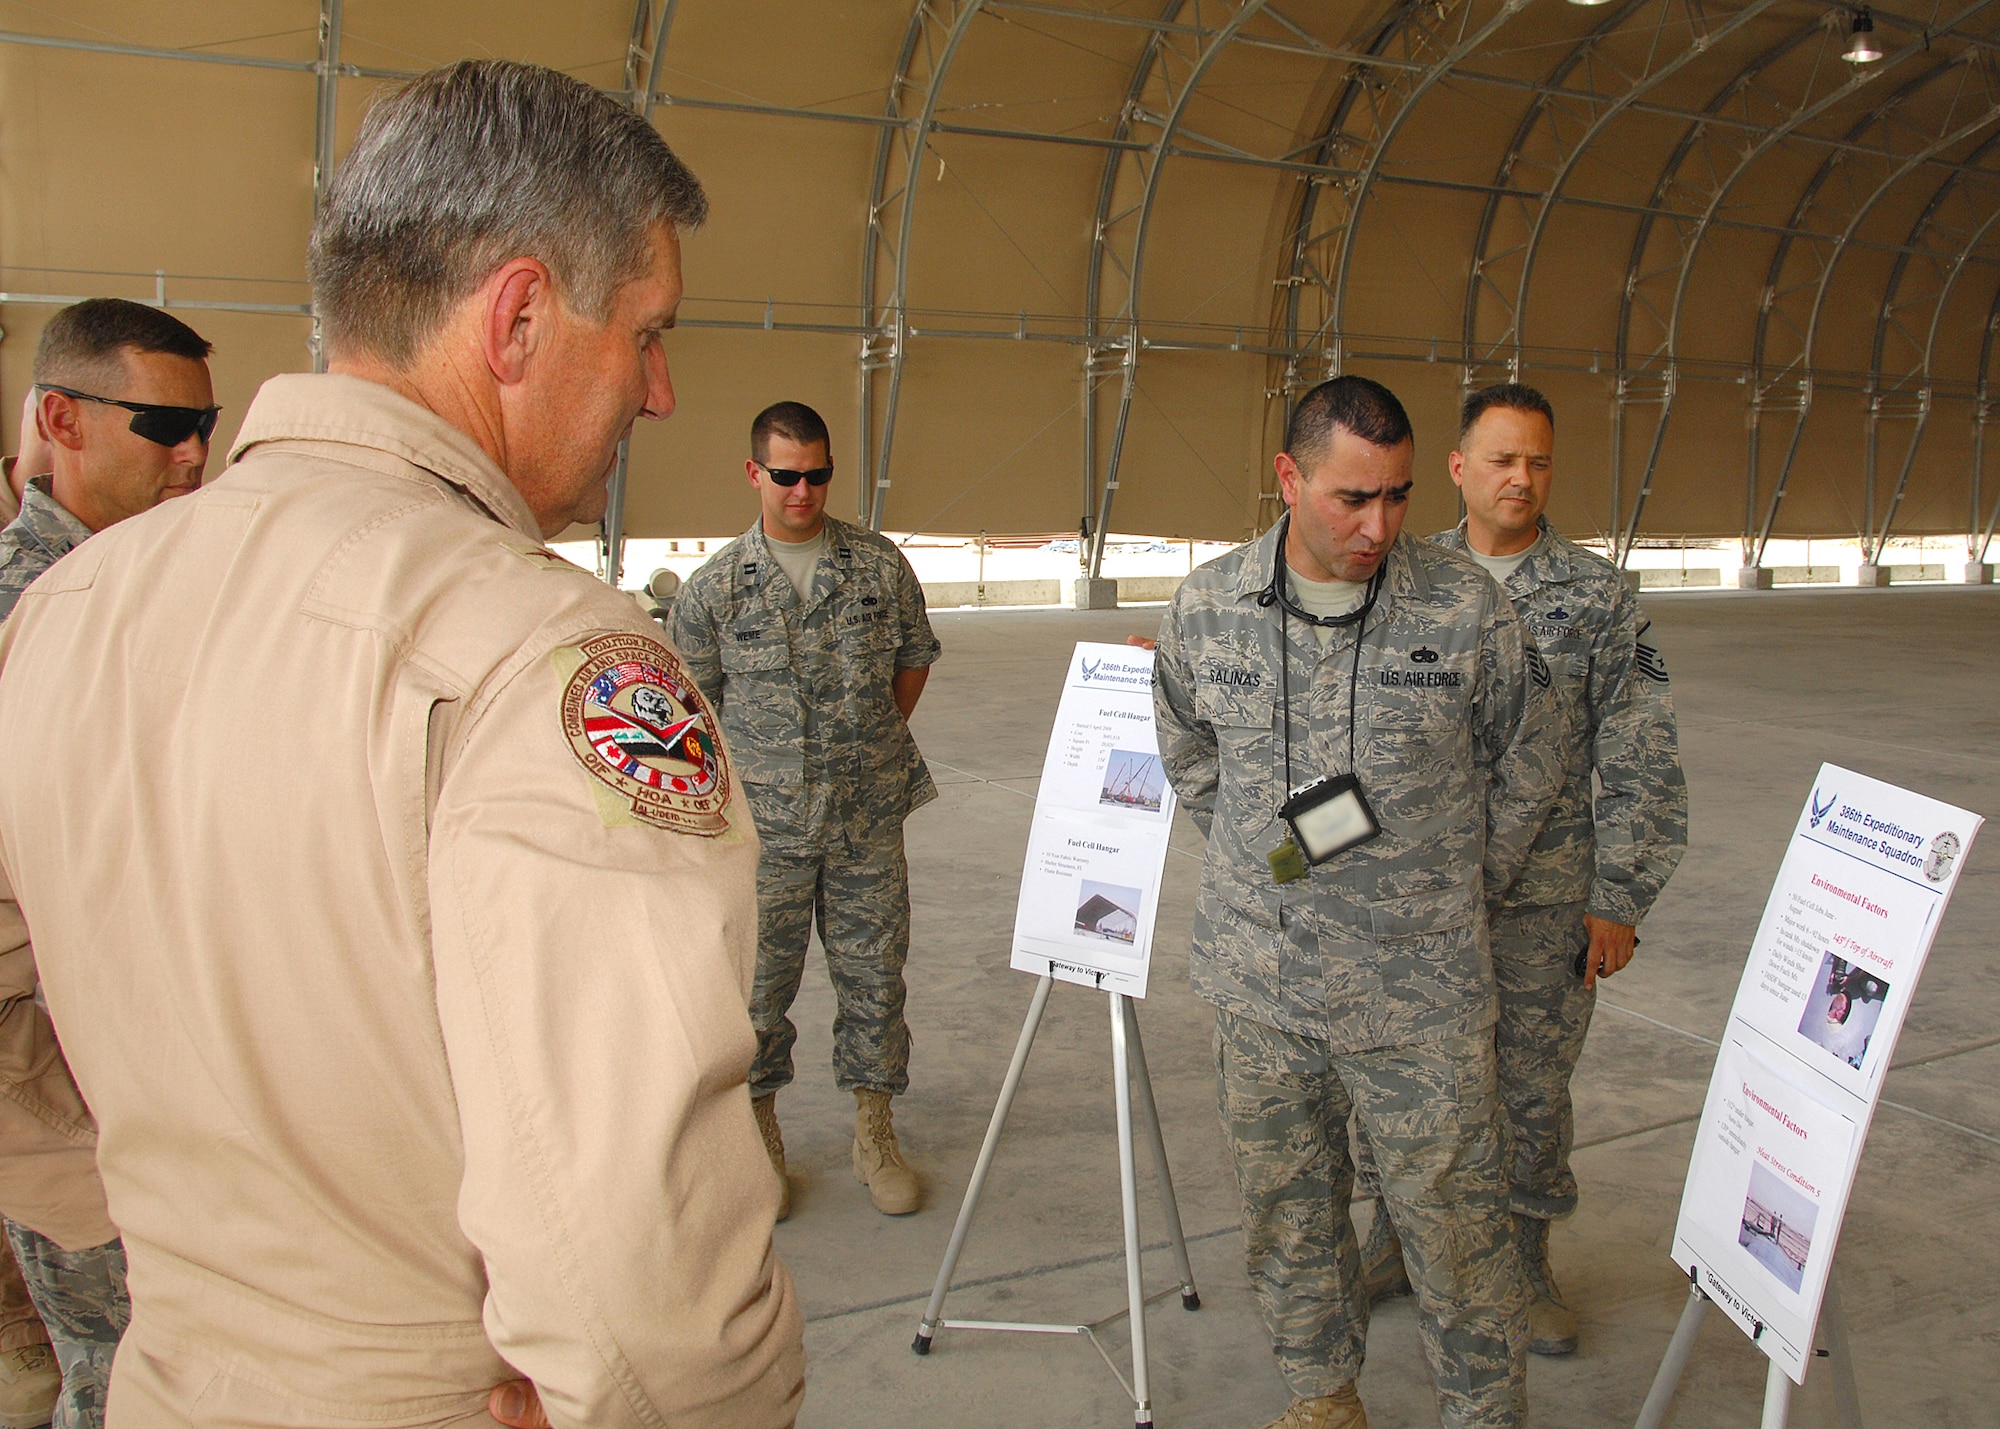 SOUTHWEST ASIA -- Brig. Gen. Lance Undjem, Combined Air and Space Operations Center director, listens to a briefing by Tech. Sgt. Benedict Salinas, 386th Expeditionary Maintenance Squadron, on Aug. 29 at an airbase in Southwest Asia. The brief, which discussed the 386th Air Expeditionary Wing's newly completed fuel cell building, explained the overall efficiency improvements in fuel tank cleaning that will result from its operation. General Undjem is the new CAOC director, and is touring U.S. Central Command observing how the CAOC contributes to day-to-day operations in the theater. Sergeant Salinas is deployed from Dyess Air Force Base, Texas. (U.S. Air Force photo/Tech. Sgt. Raheem Moore)